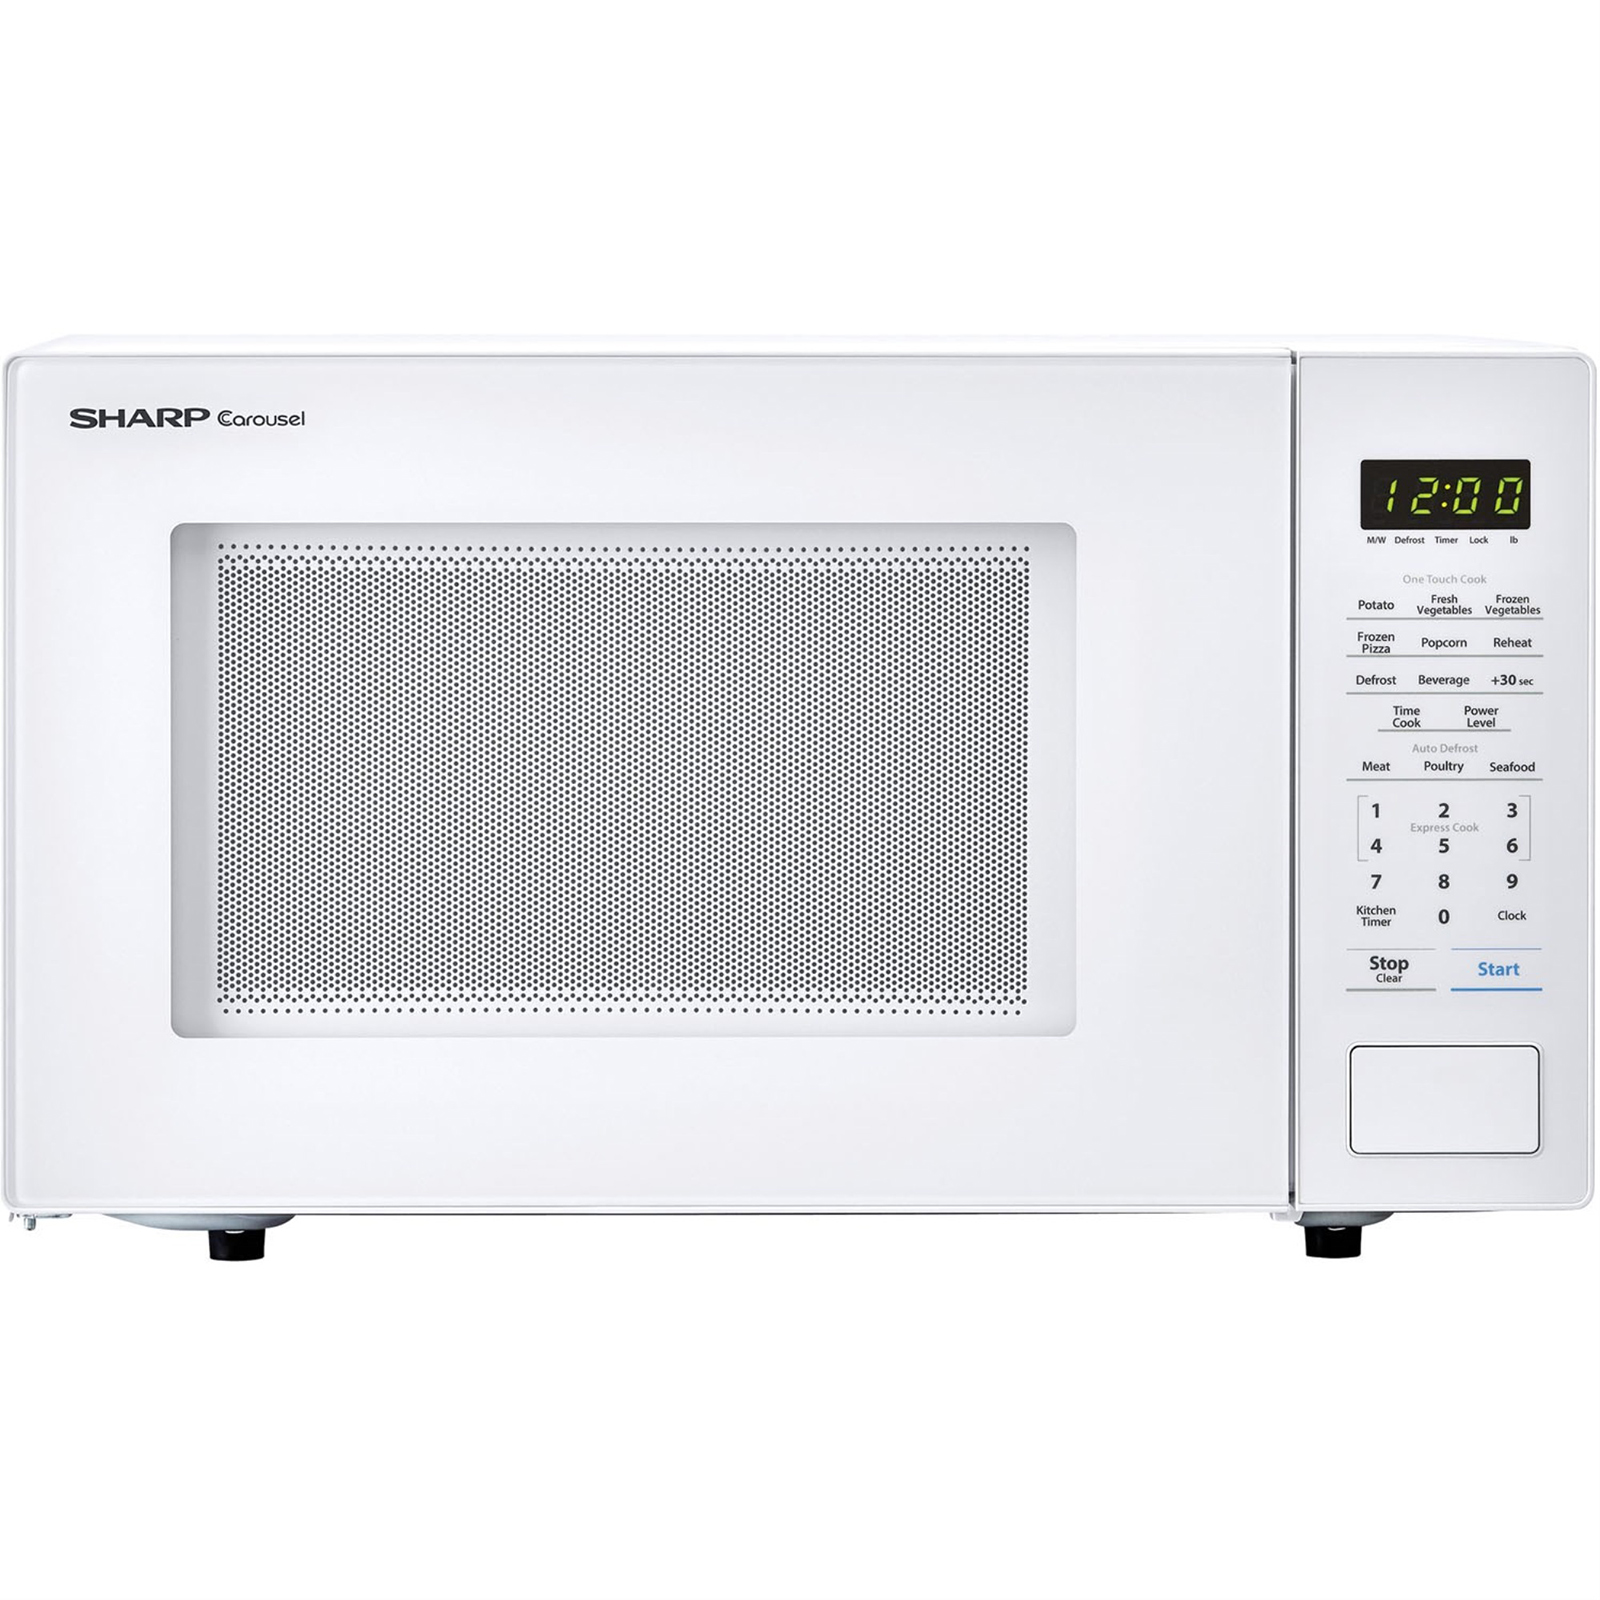 Sharp 1.1cu.ft. Carousel Countertop Microwave Oven - White